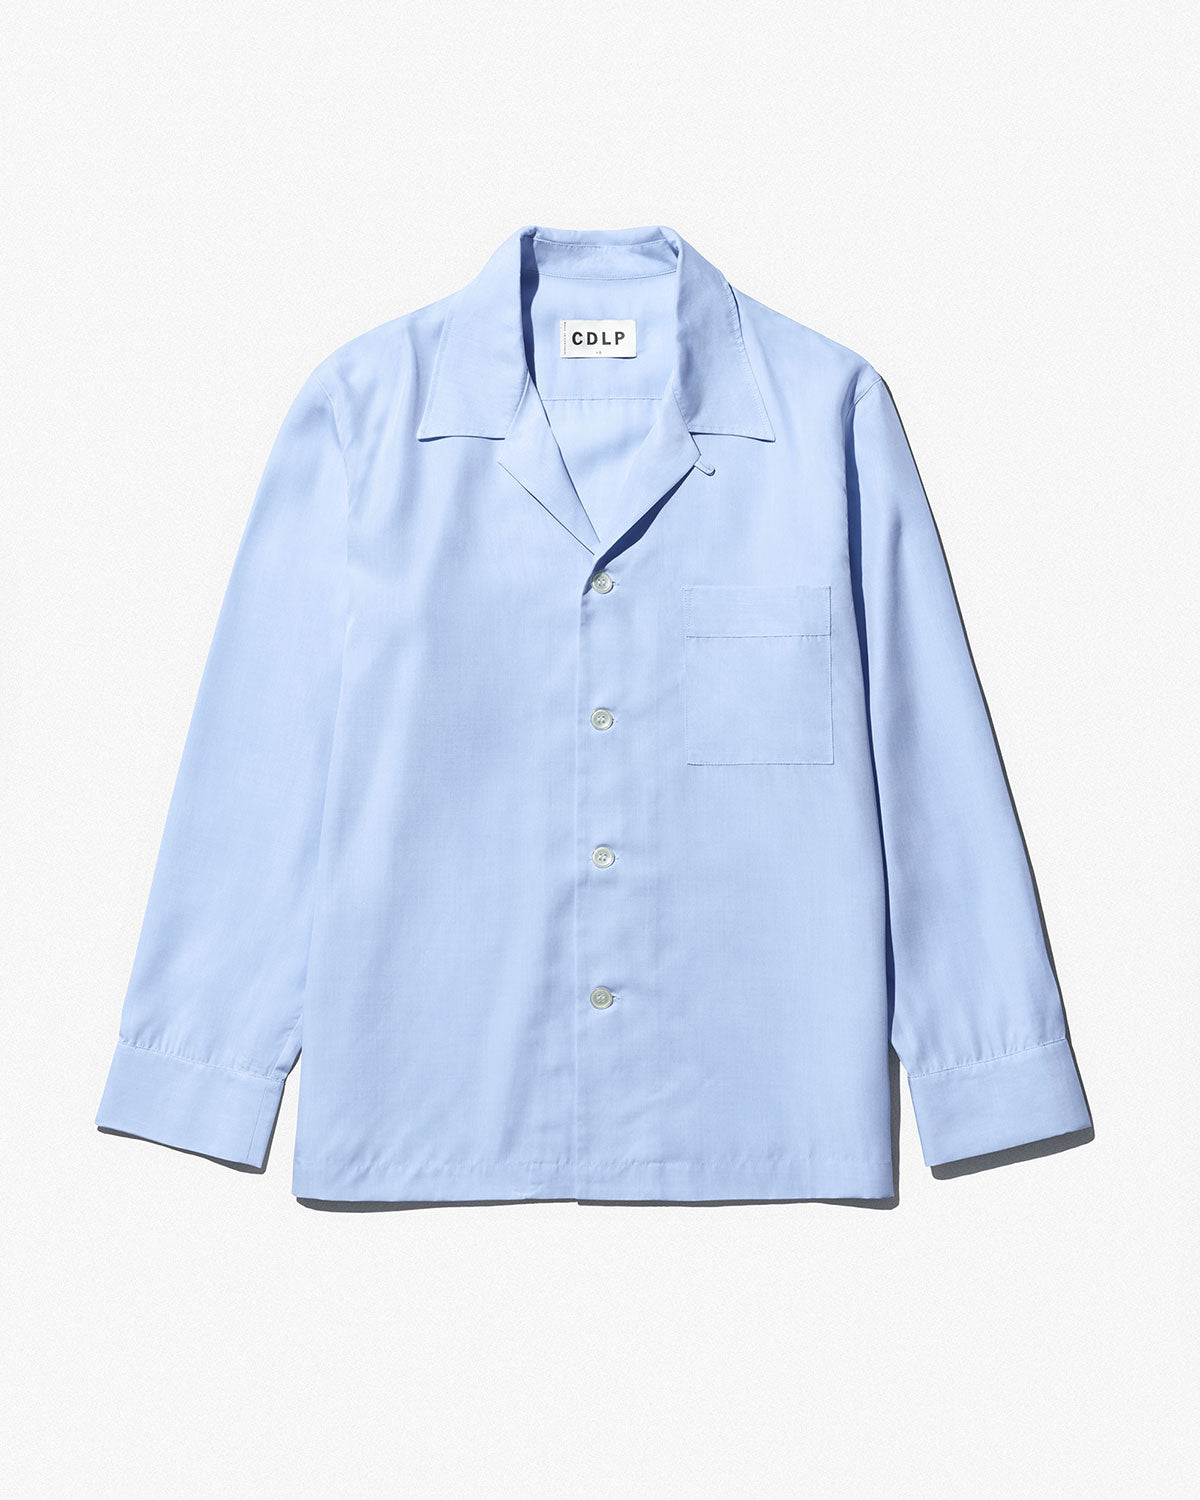 20 Camp Shirts to Shop Now